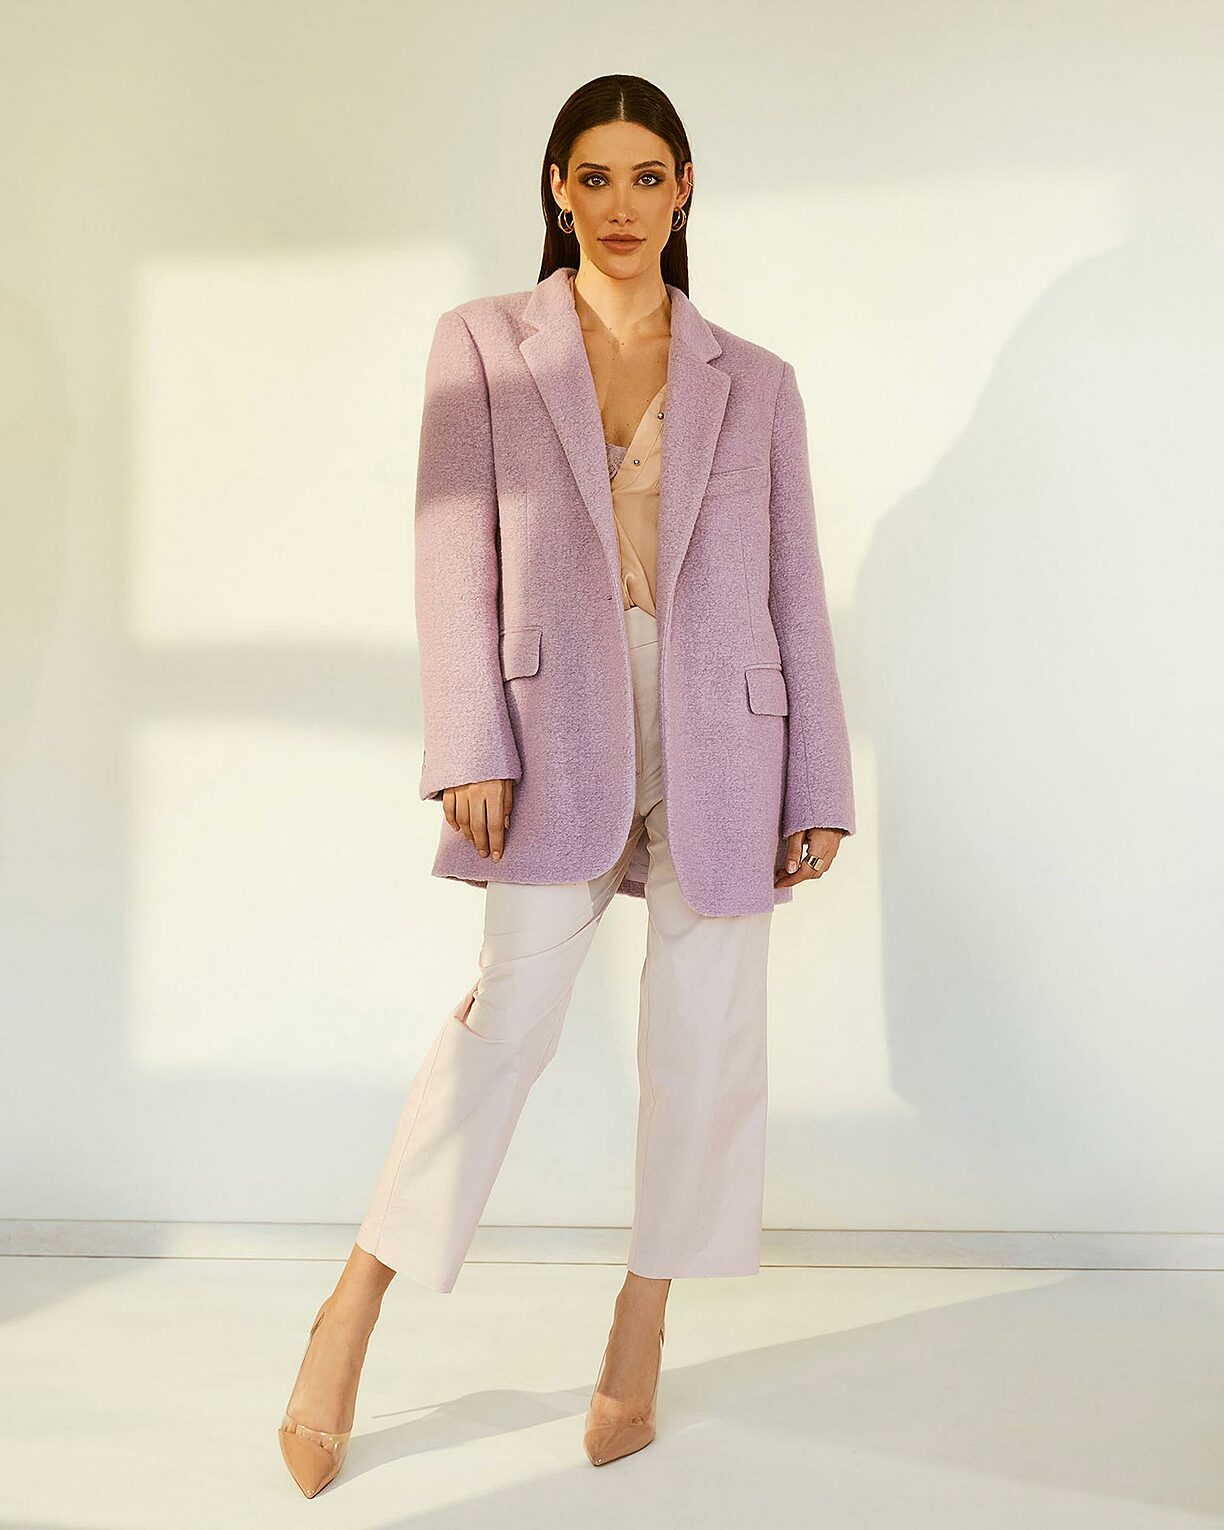 A female model stands in a sunlight from the window in rose trousers and a lilac coat